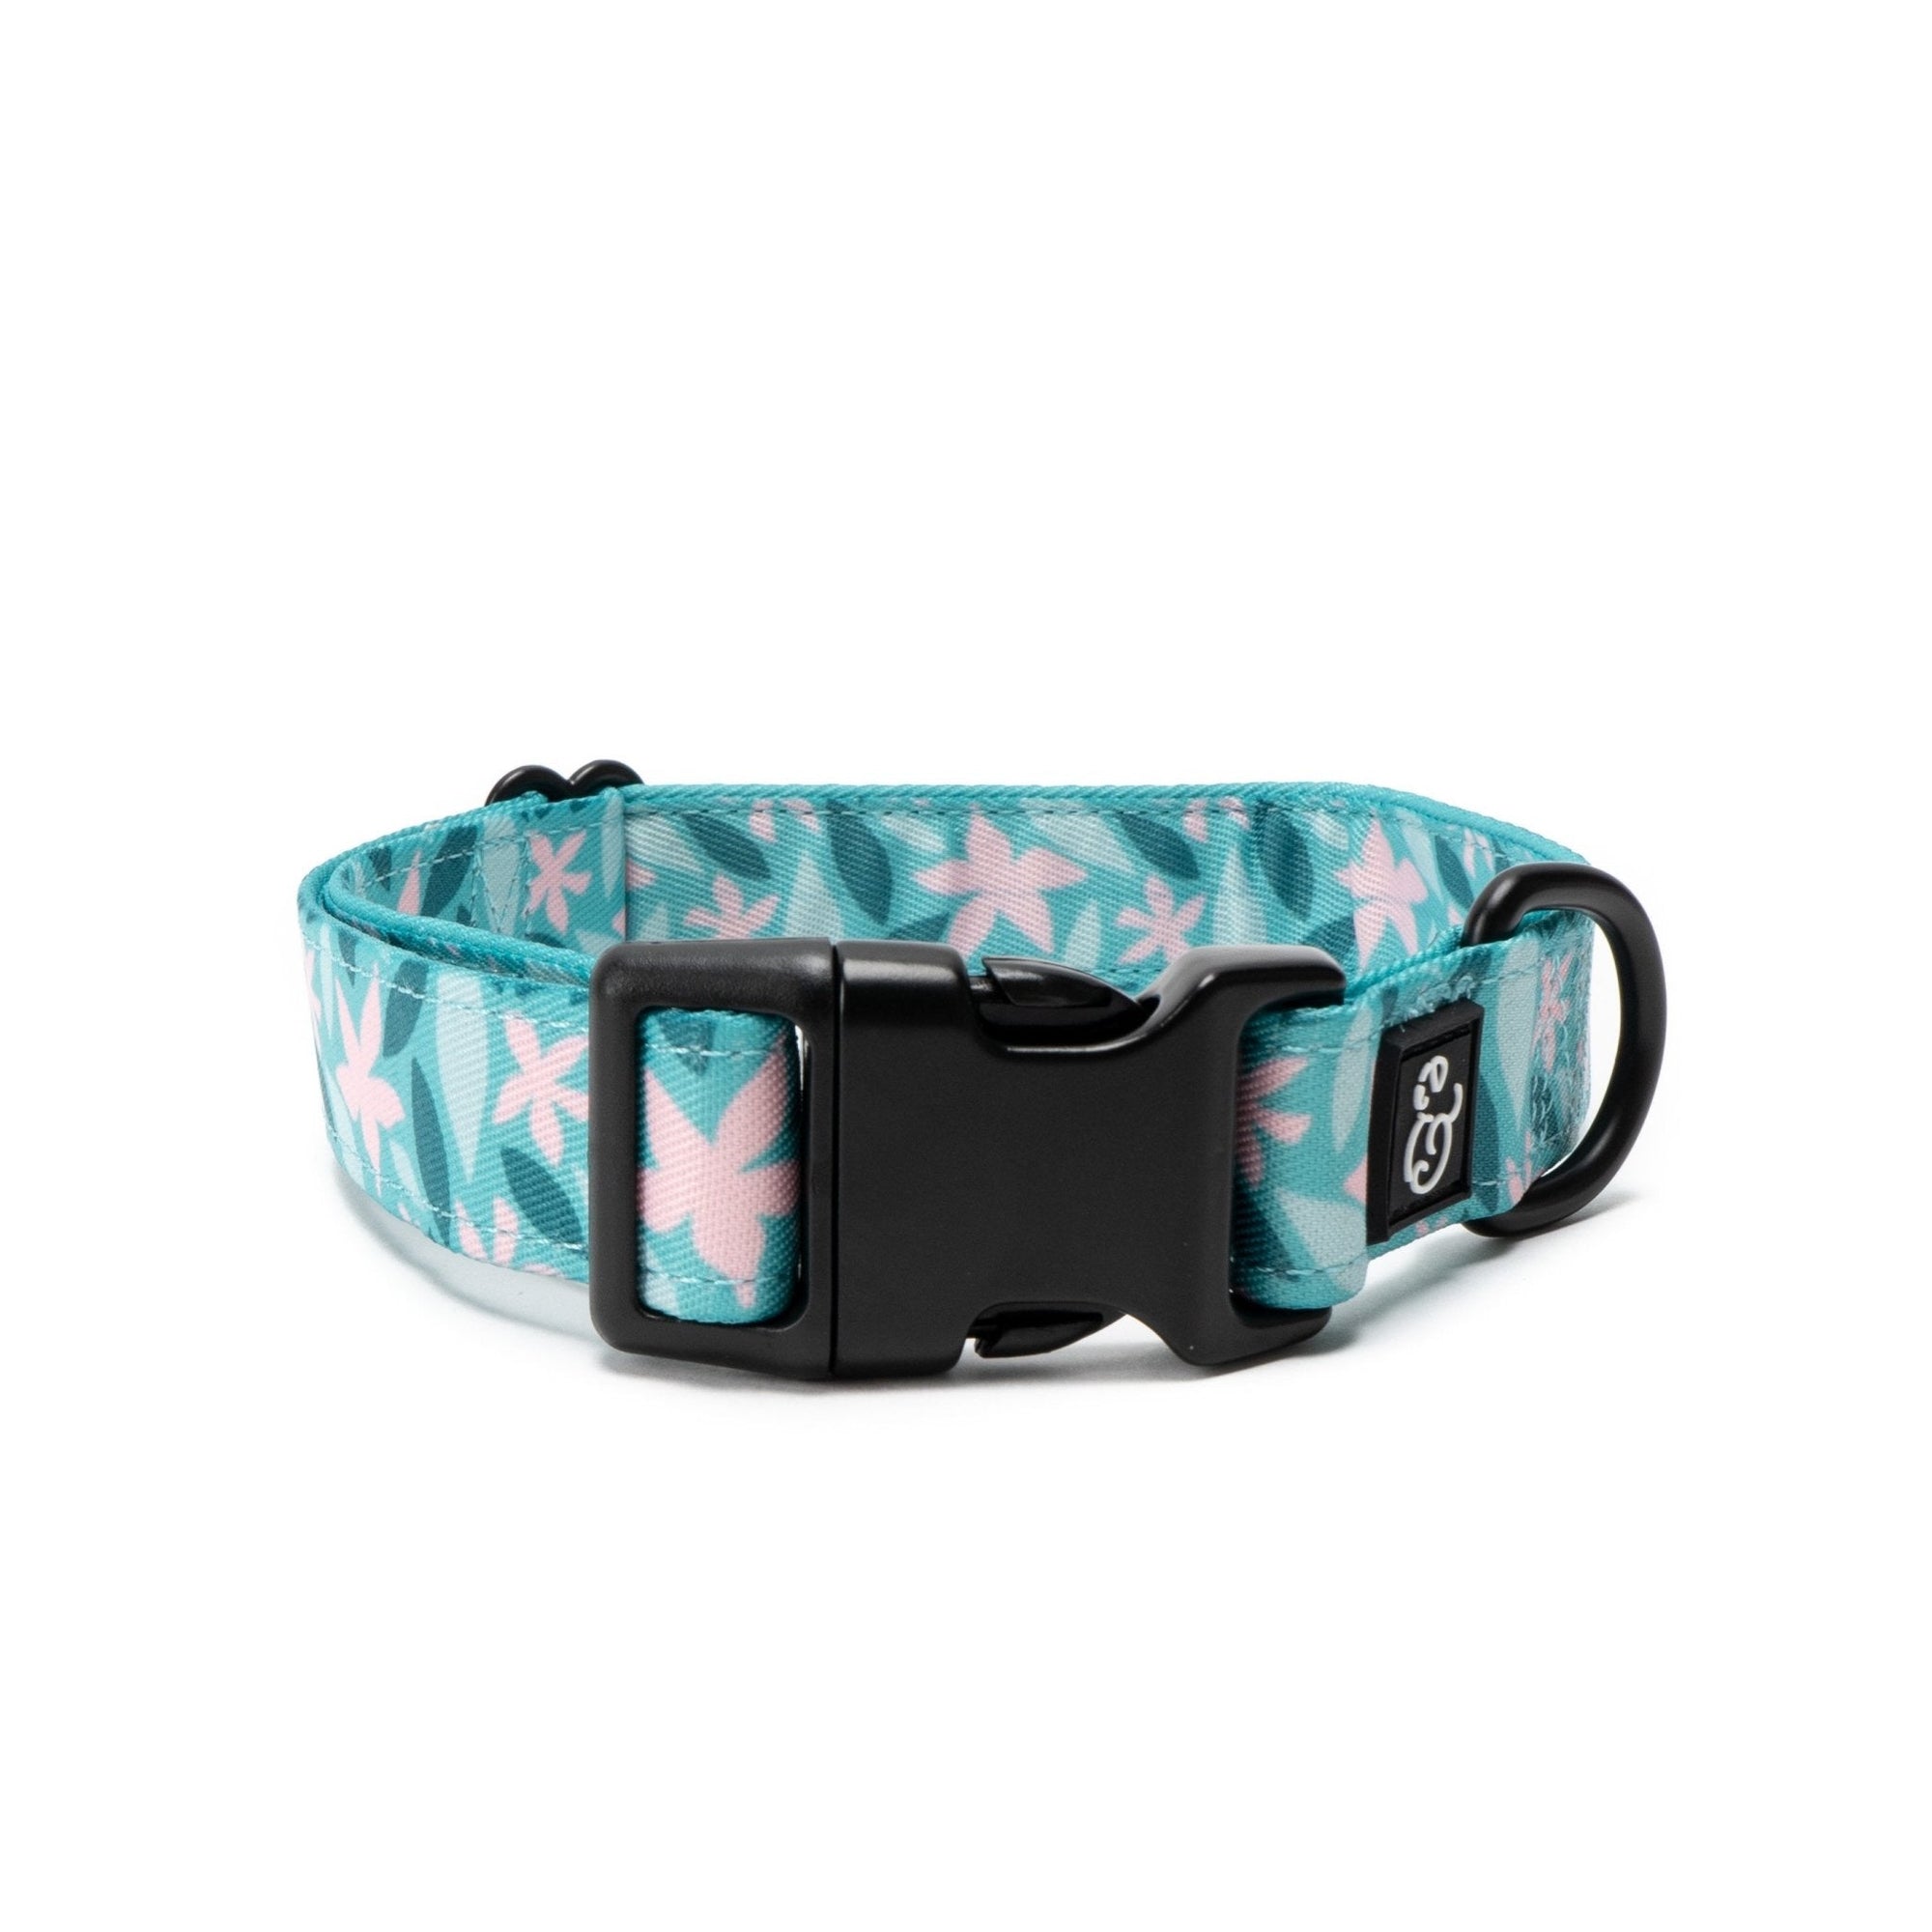 Lucy & Co. Dilly Lily - Blue & Pink - Adjustable Buckle Clip Dog Collar